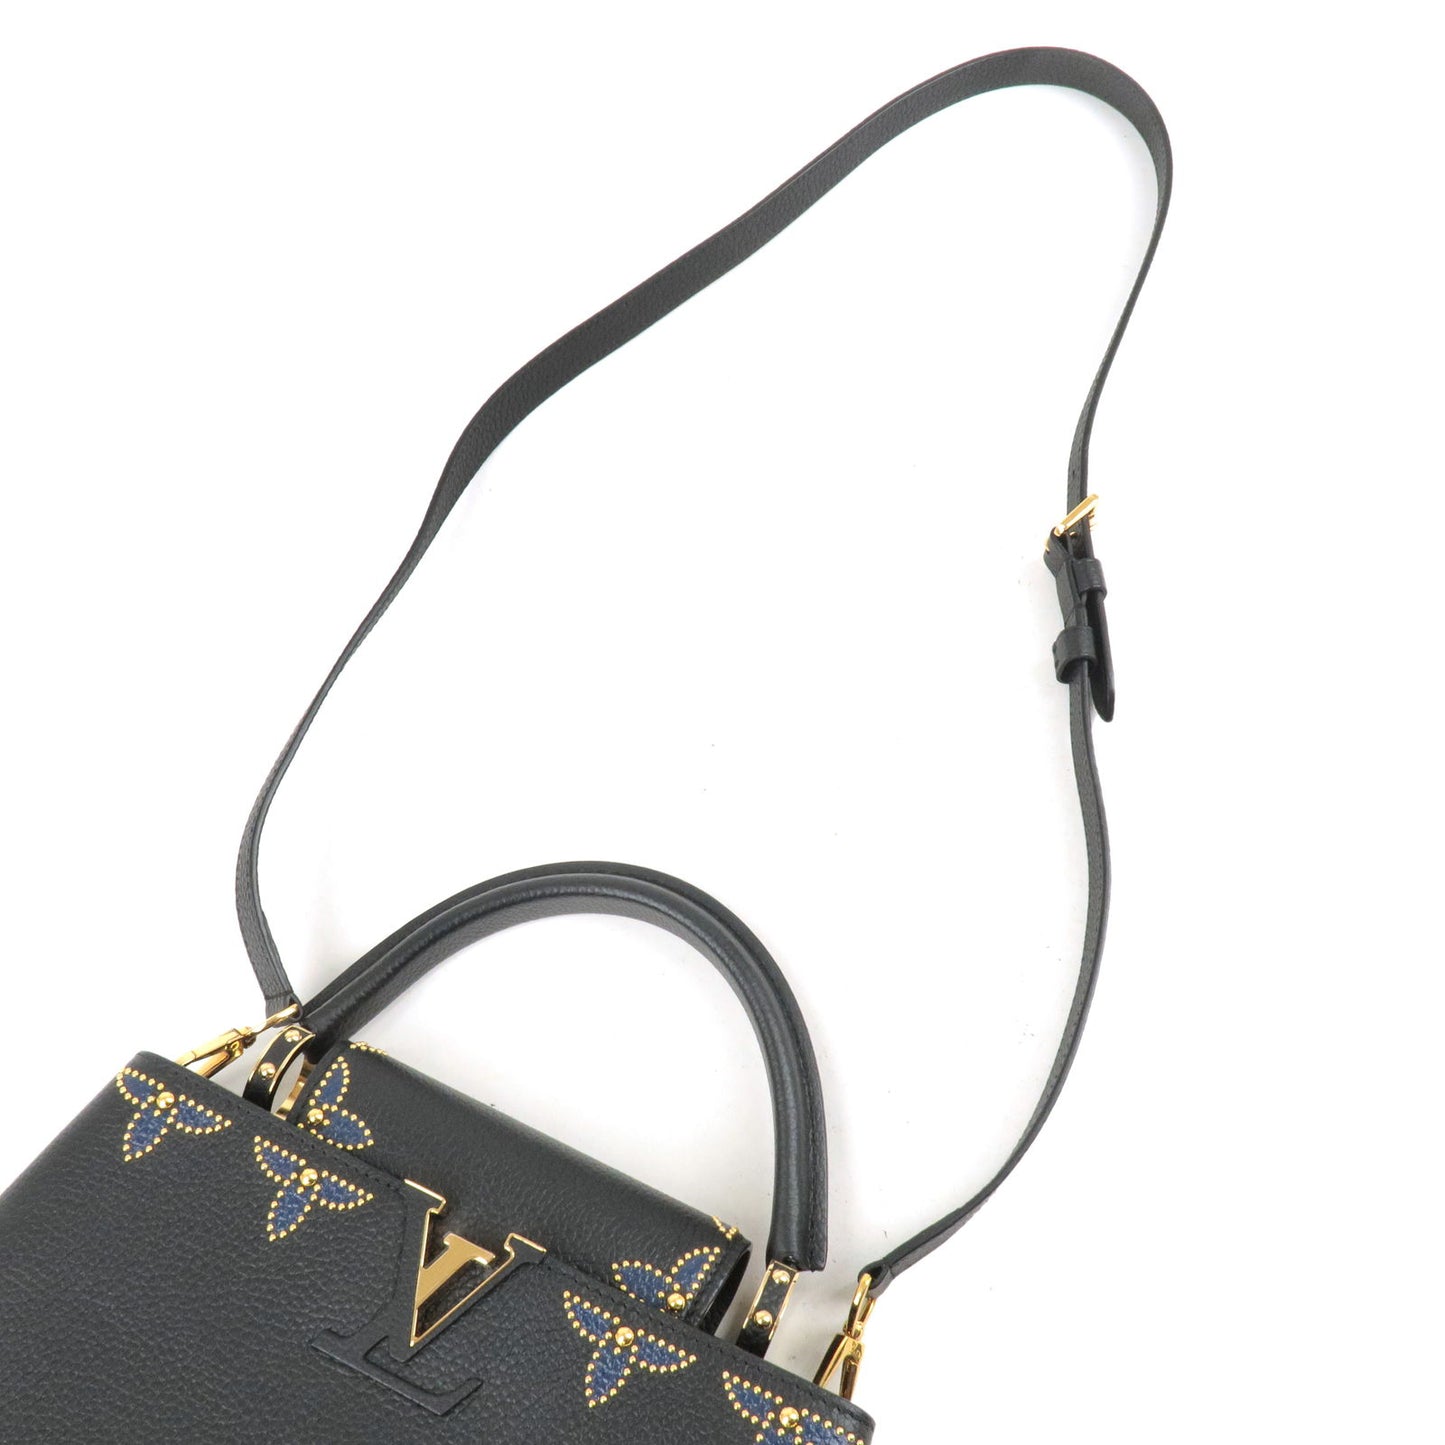 Louis-Vuitton-Studded-Capucines-PM-2Way-Hand-Bag-M52138 – dct-ep_vintage  luxury Store